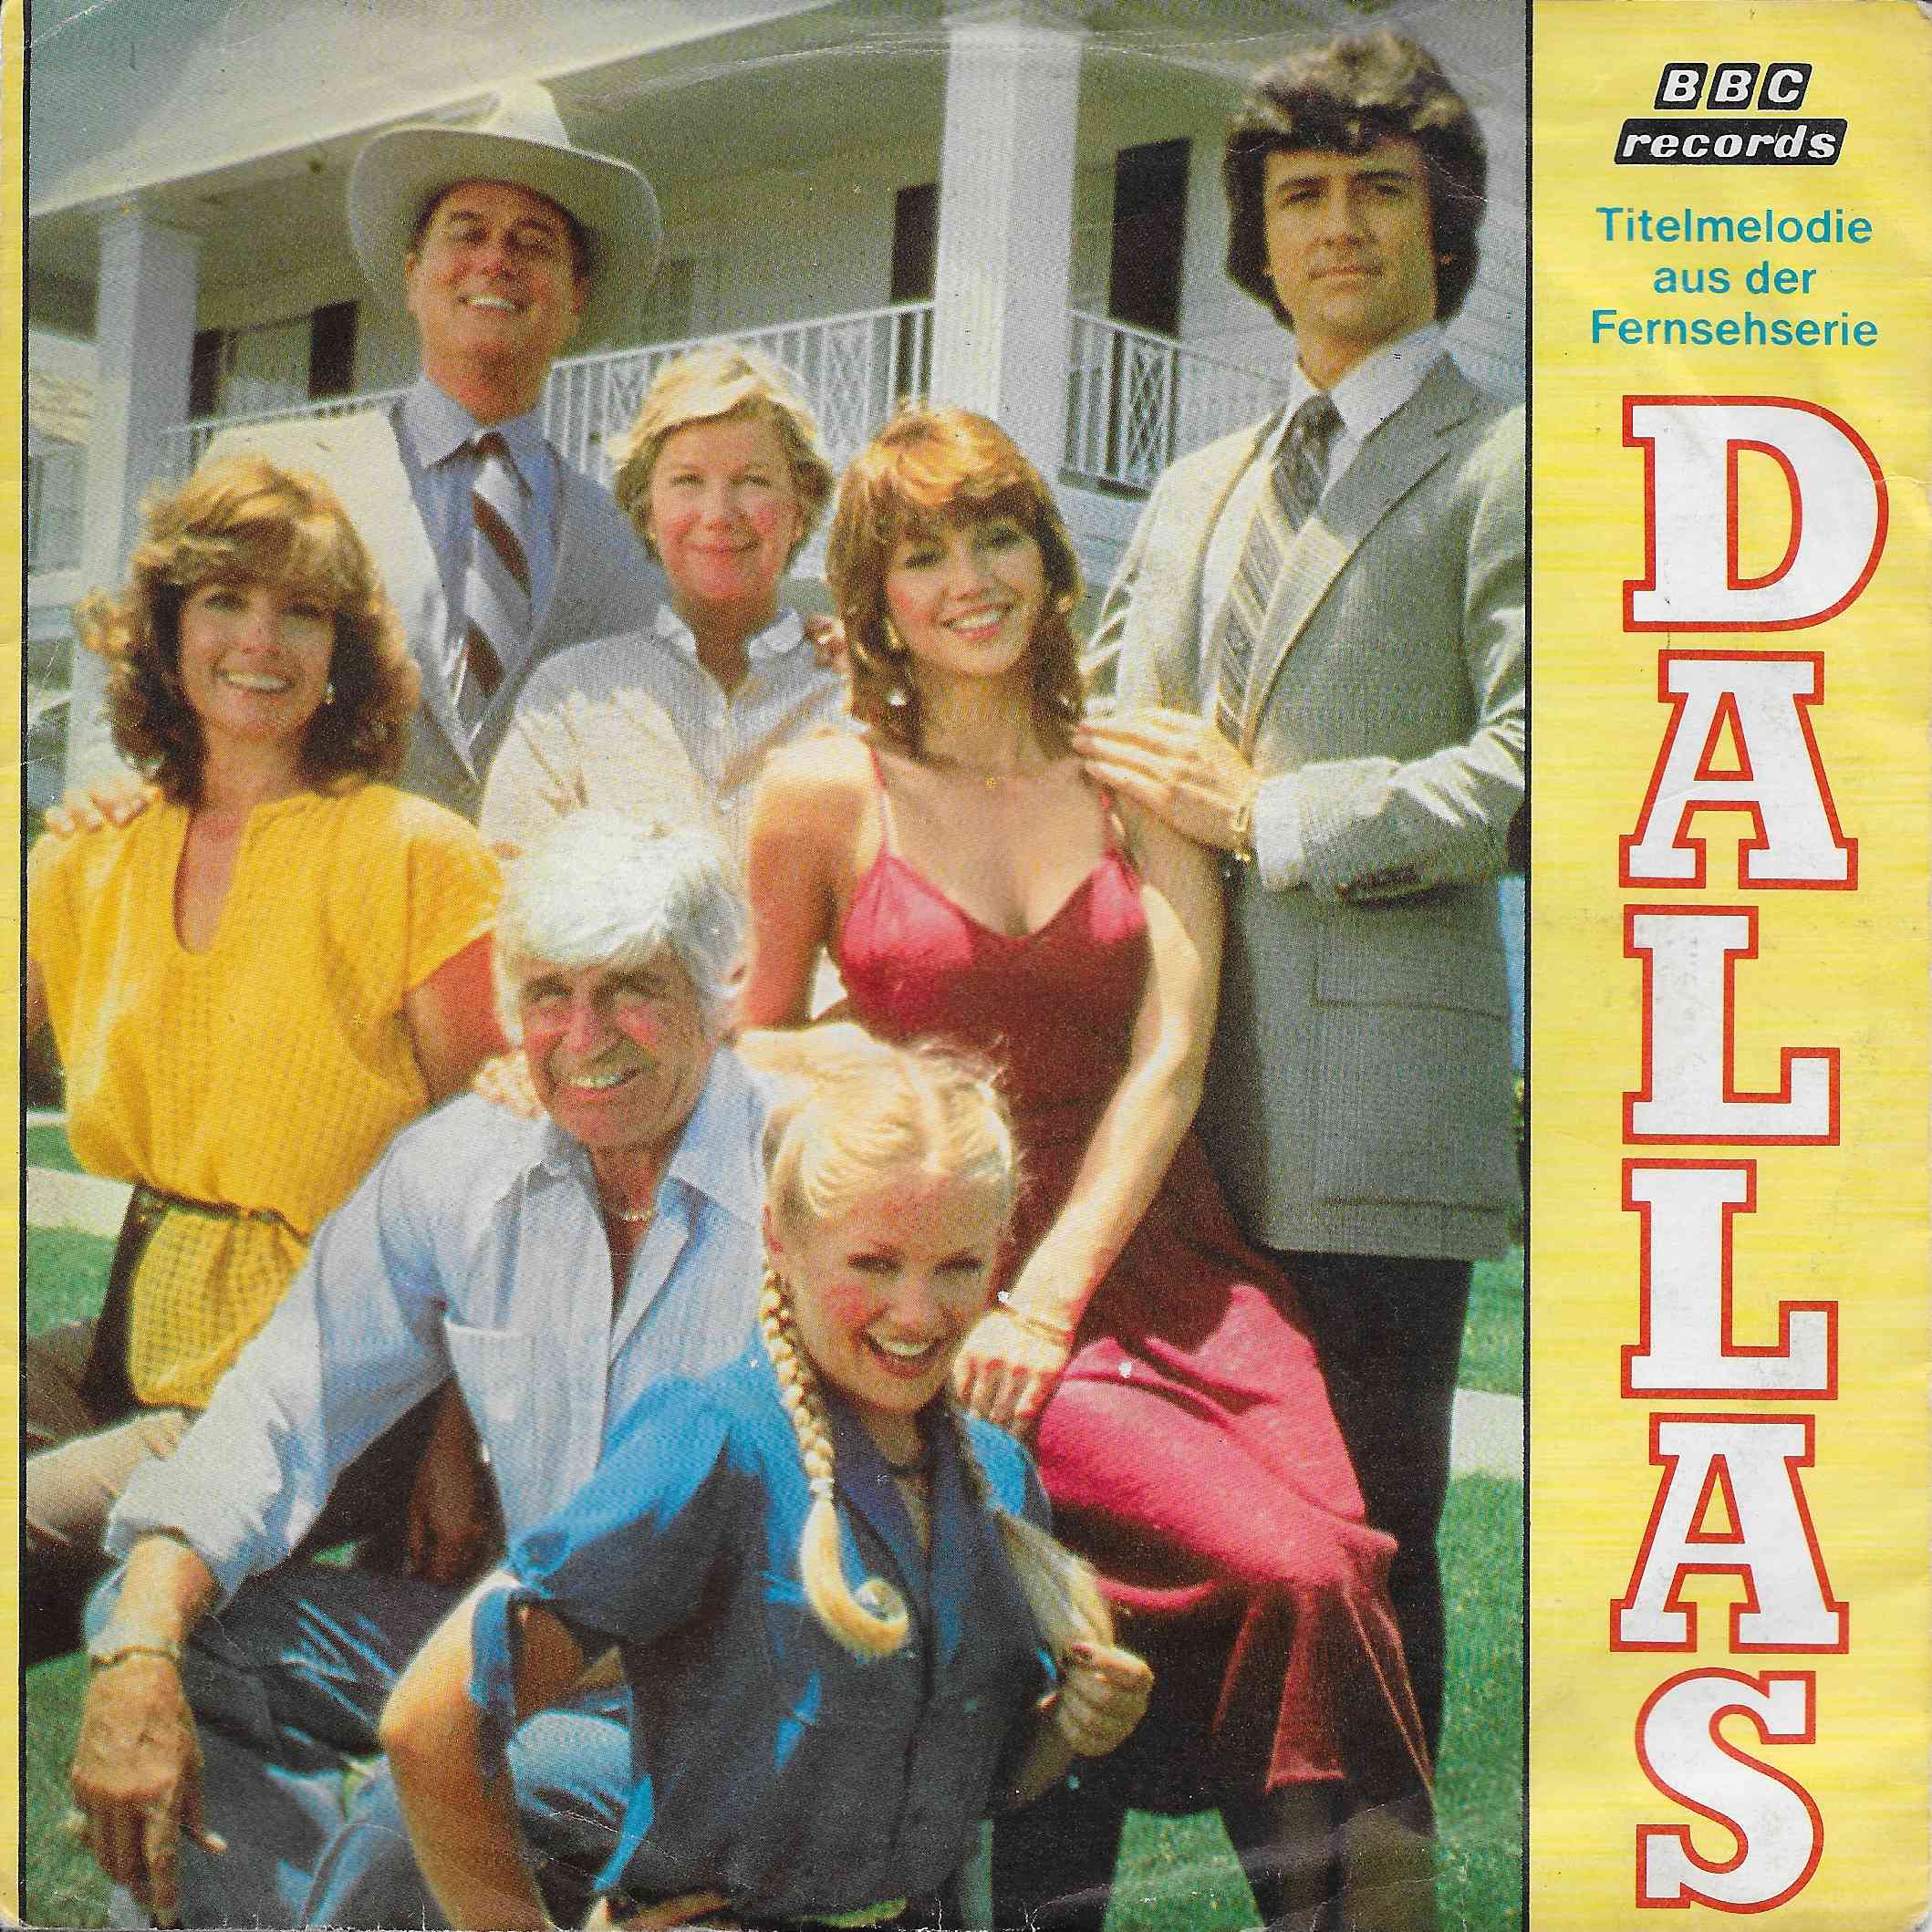 Picture of INT 113.007 Dallas by artist Jerrold Immel from the BBC singles - Records and Tapes library